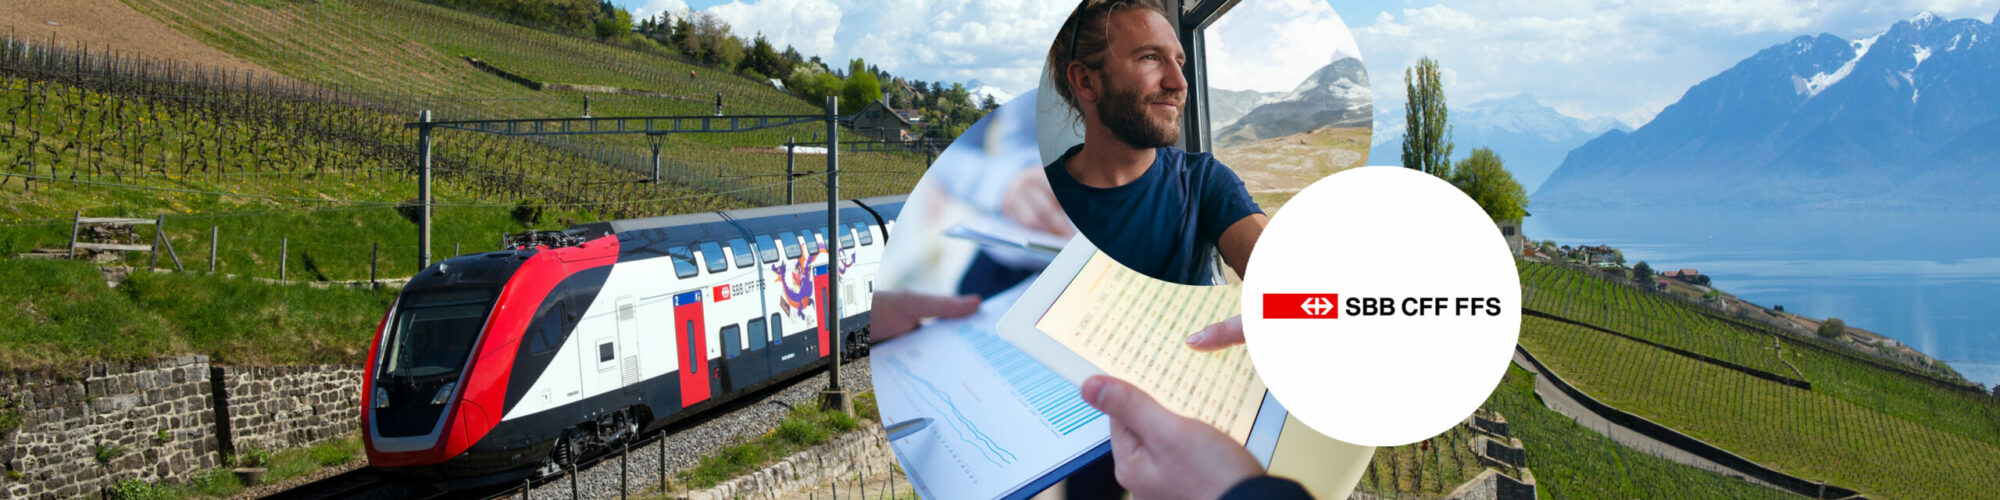 Cover image of the Success Story SBB: in the background you can see a train of the Swiss Federal Railways passing through the Swiss mountains, in the foreground three images consisting of diagrams, a passenger and the SBB logo | Success Story SBB: Business Planning with Anaplan